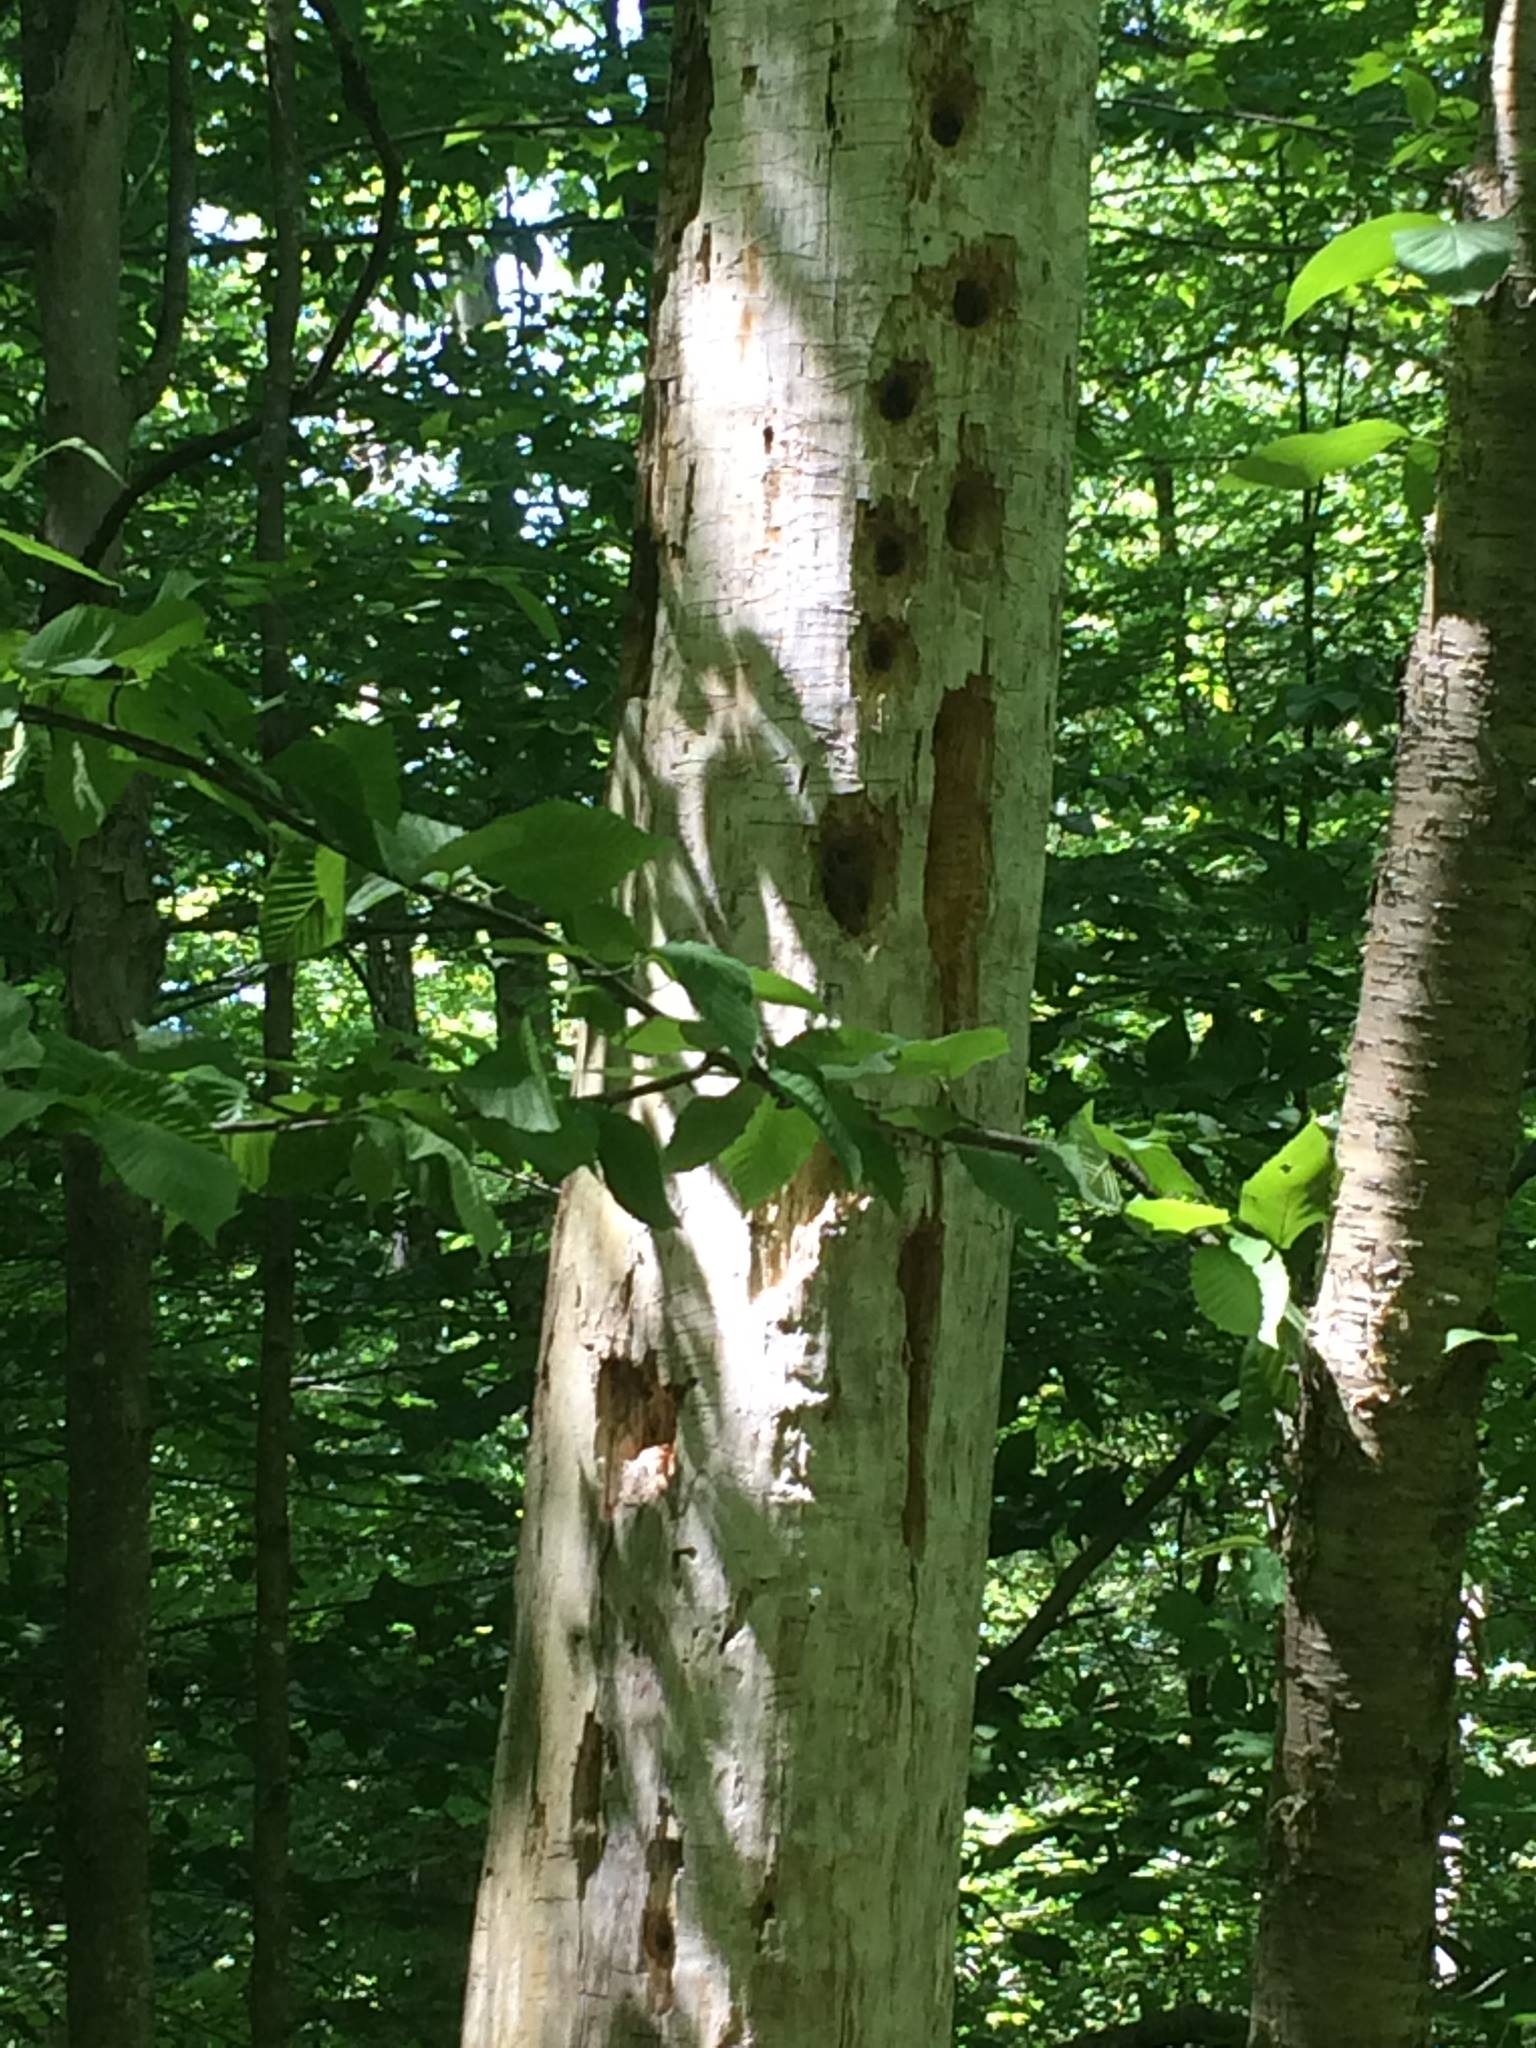 Dead tree trunk, barkless, with deep holes created by pileated woodpecker. Green forest foliage visible in background.